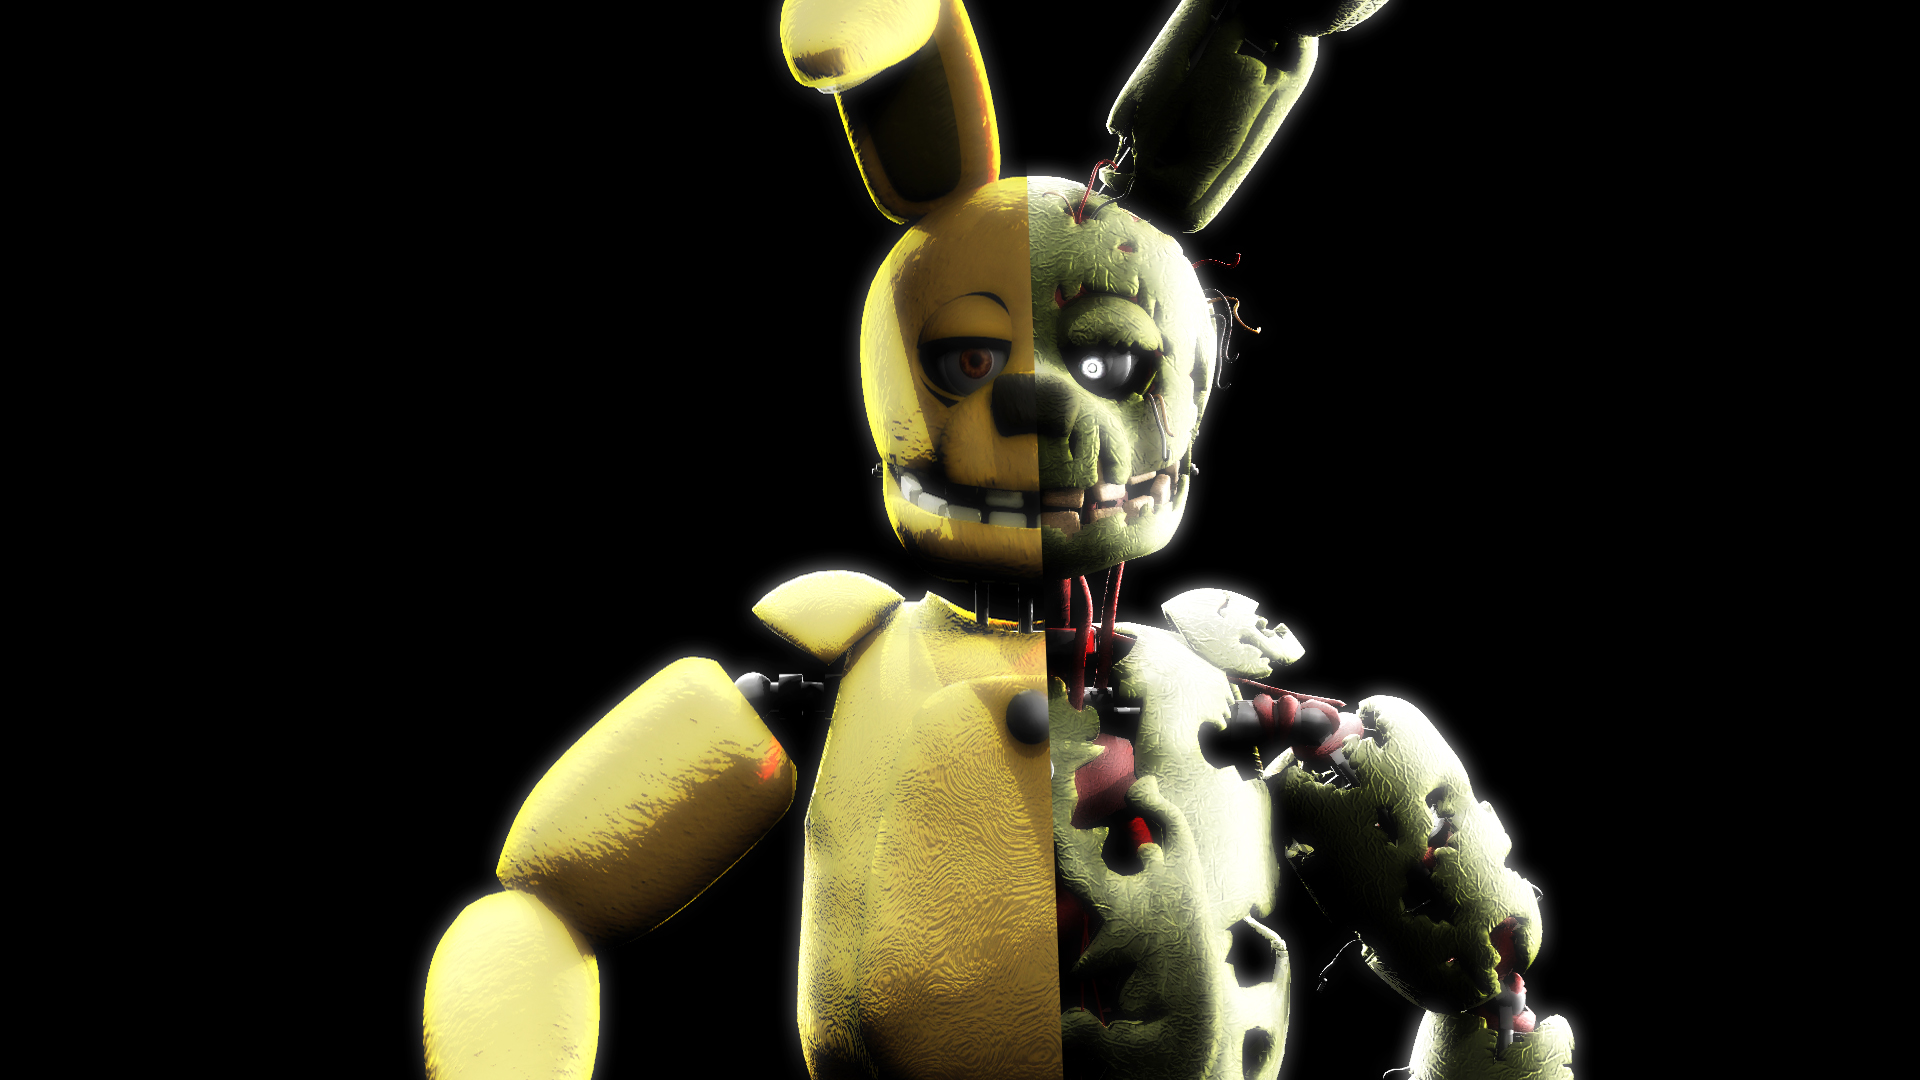 1920x1080 Springtrap (Five Nights at Freddys), Golden Bonnie (Five Nights at Freddys) wallpaper JPG